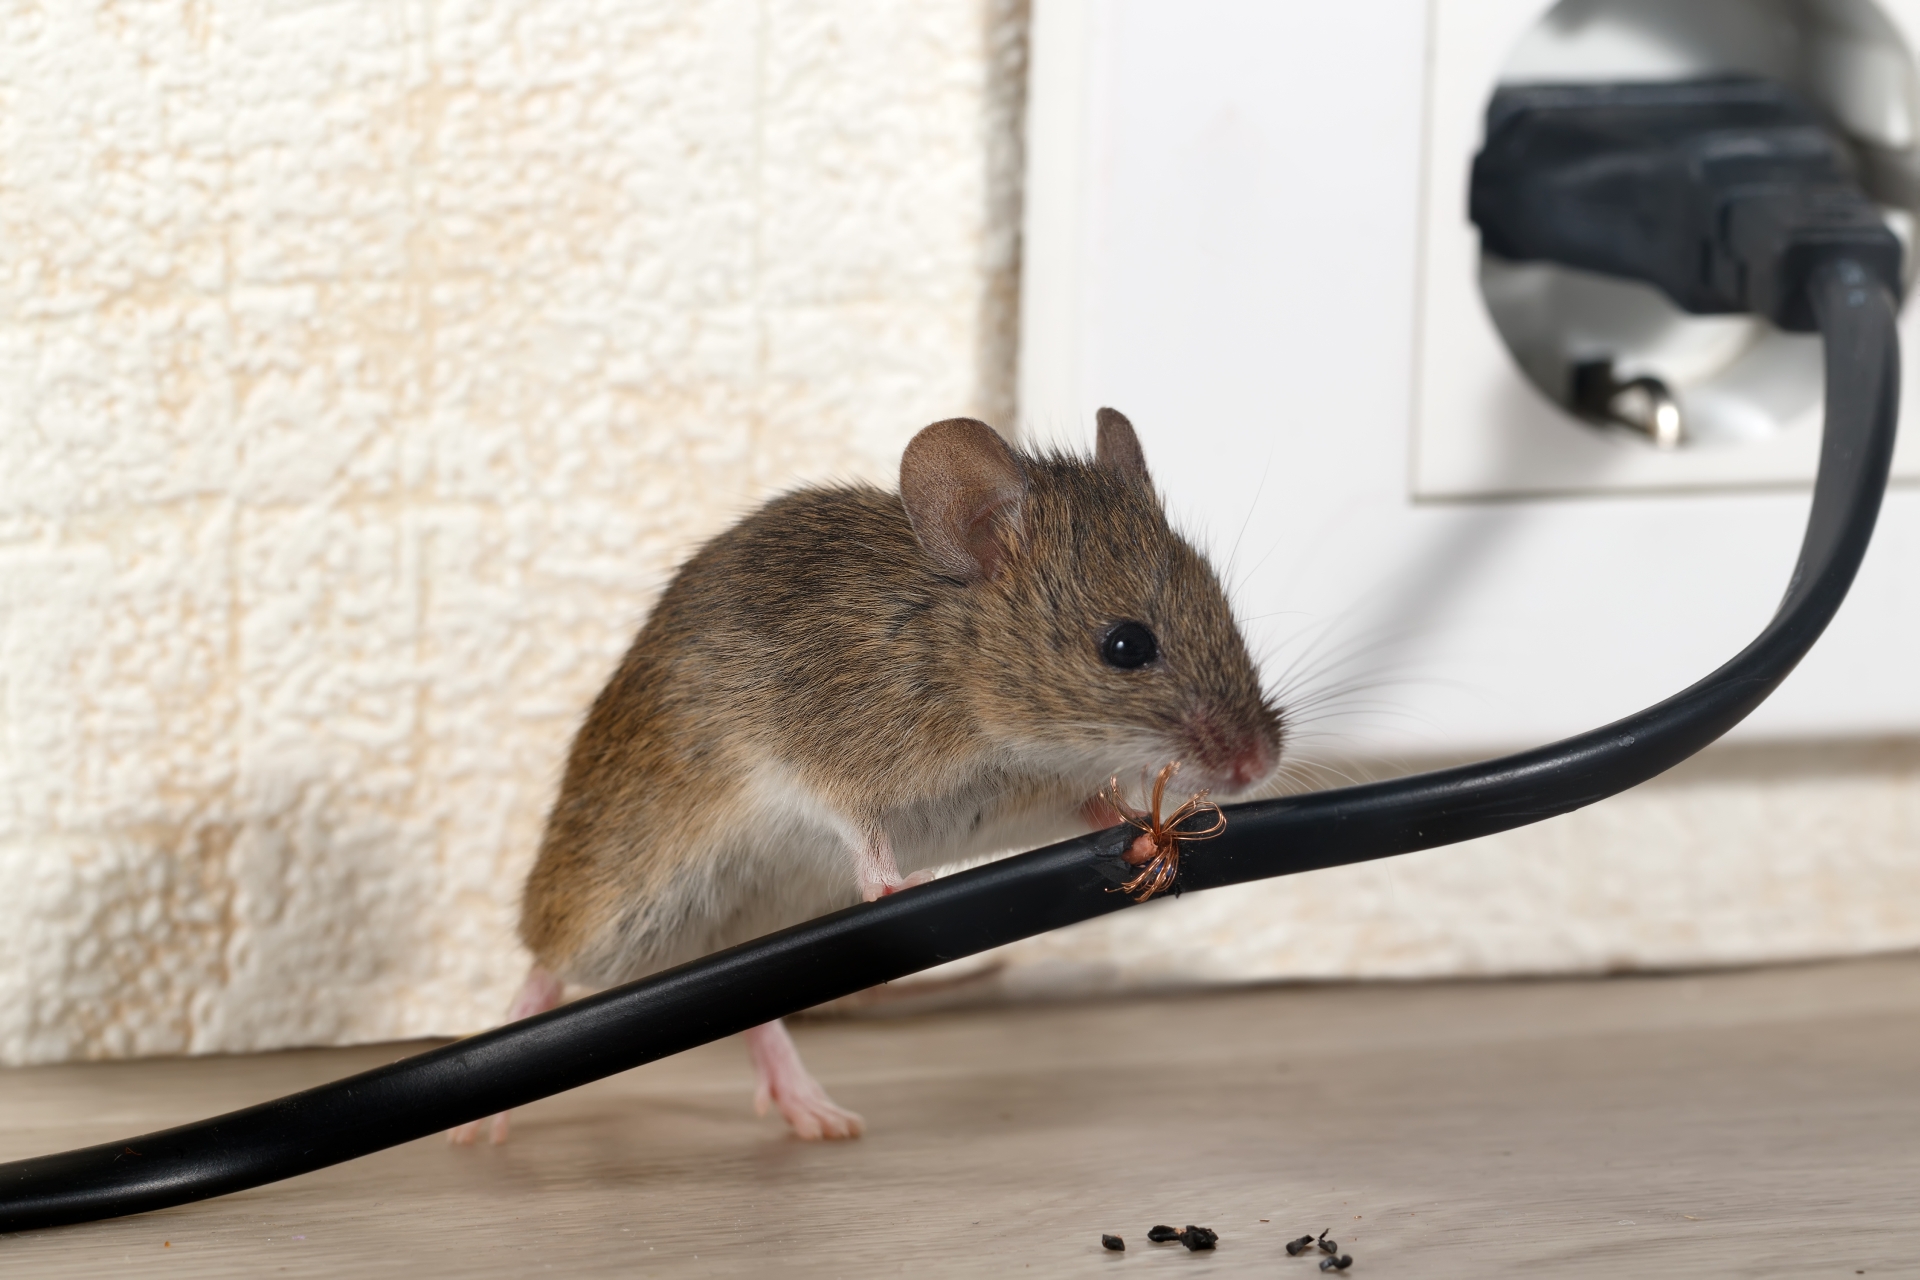 Mice Infestation, Pest Control in Putney, SW15. Call Now 020 8166 9746